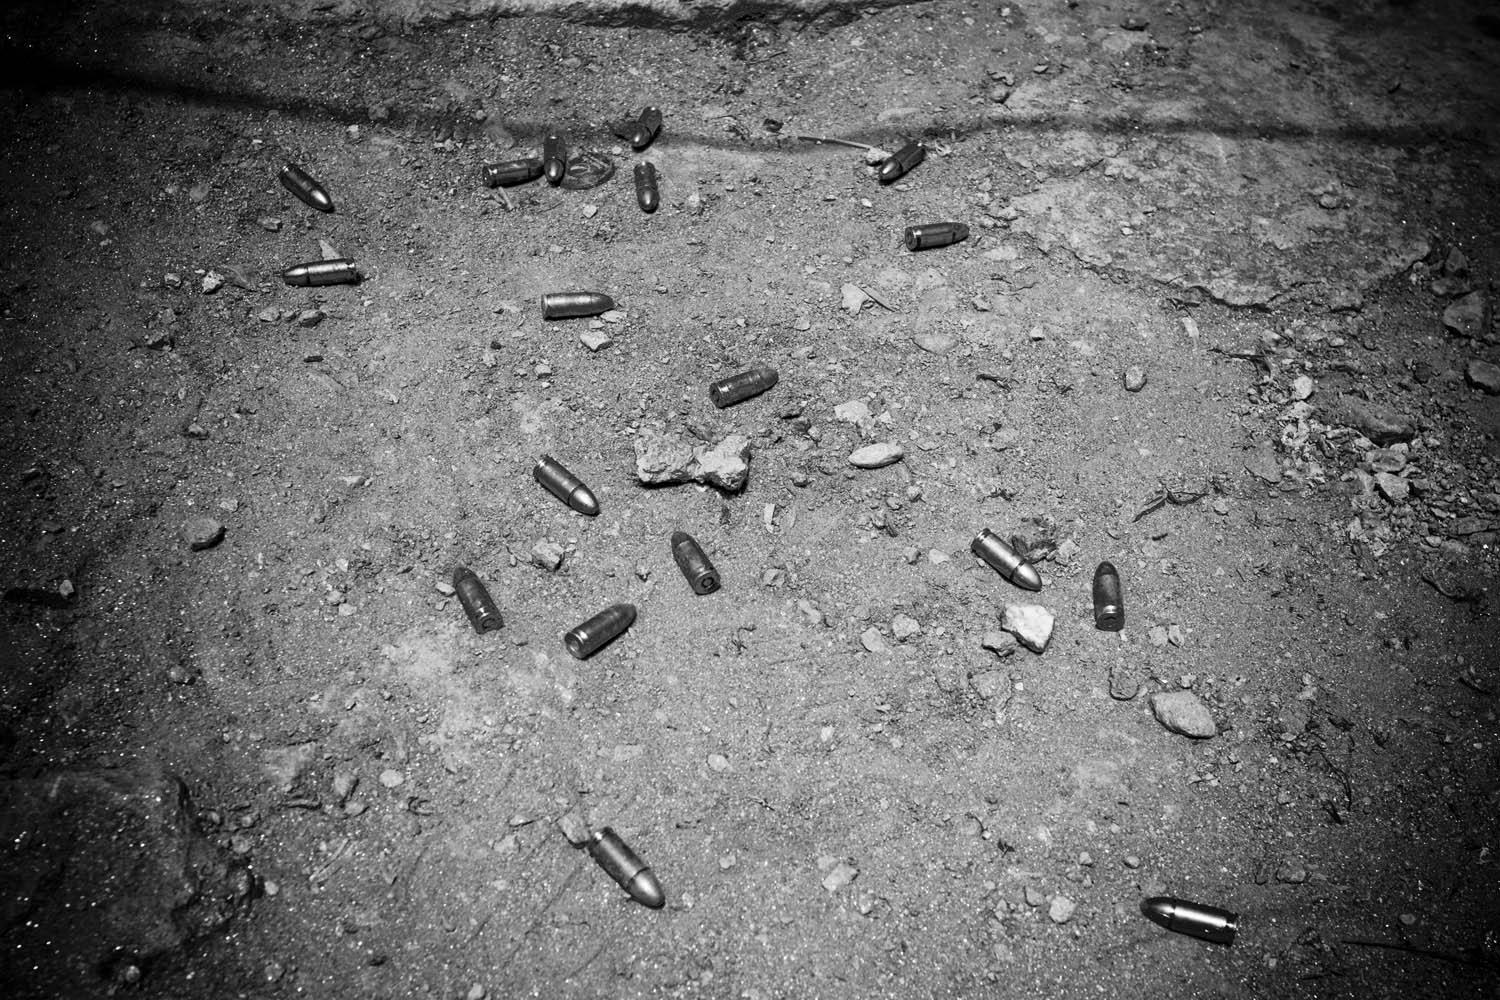 image: Bullets on the ground. The government estimates that there are more than 6 million weapons currently in the hands of civilians.